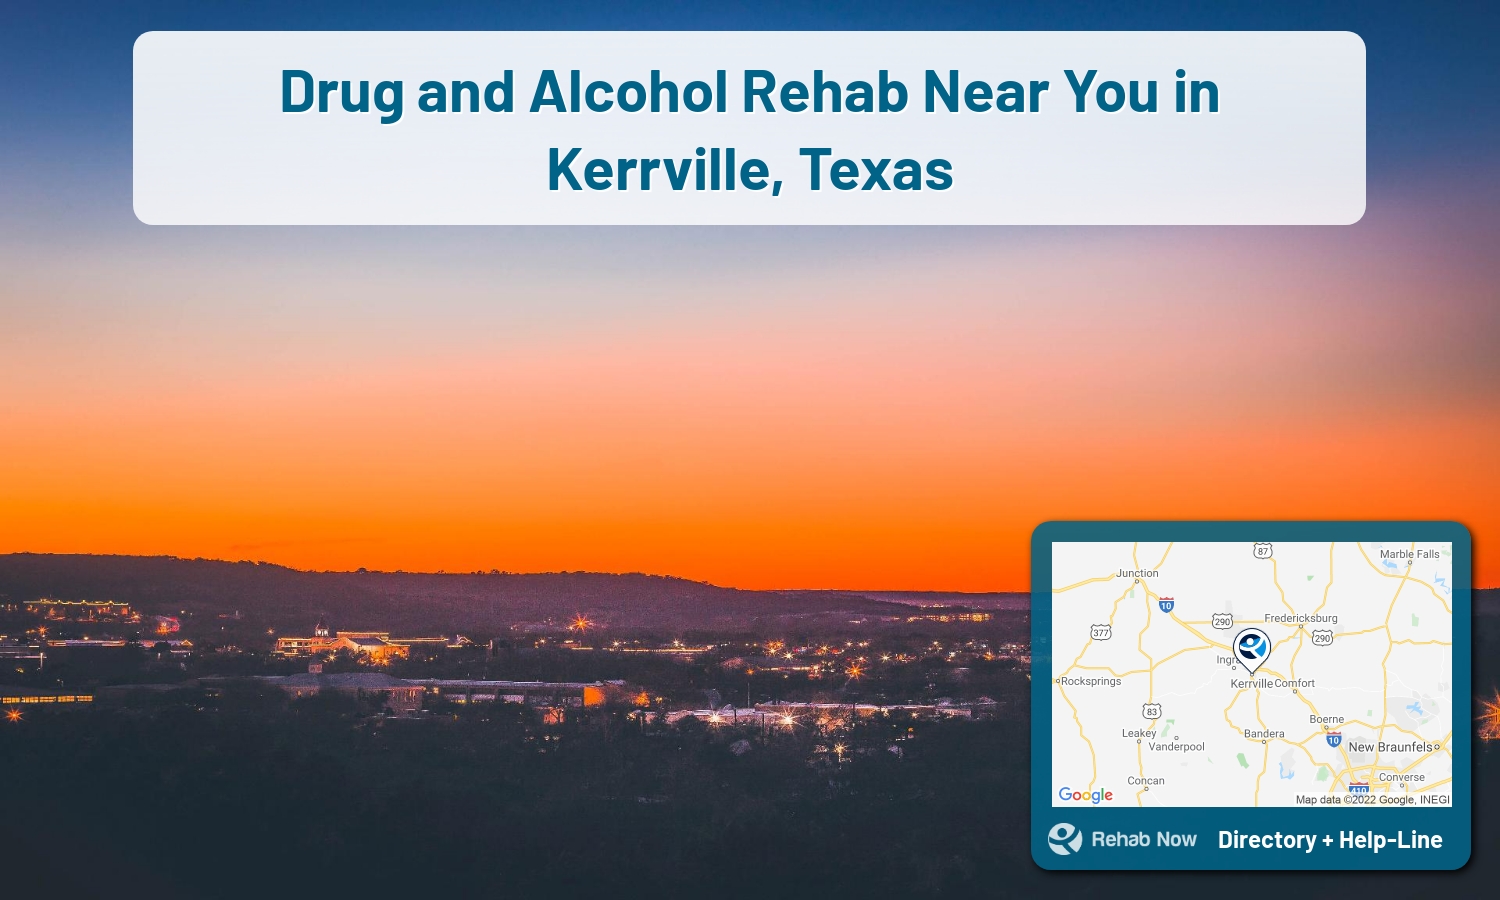 Kerrville, TX Treatment Centers. Find drug rehab in Kerrville, Texas, or detox and treatment programs. Get the right help now!